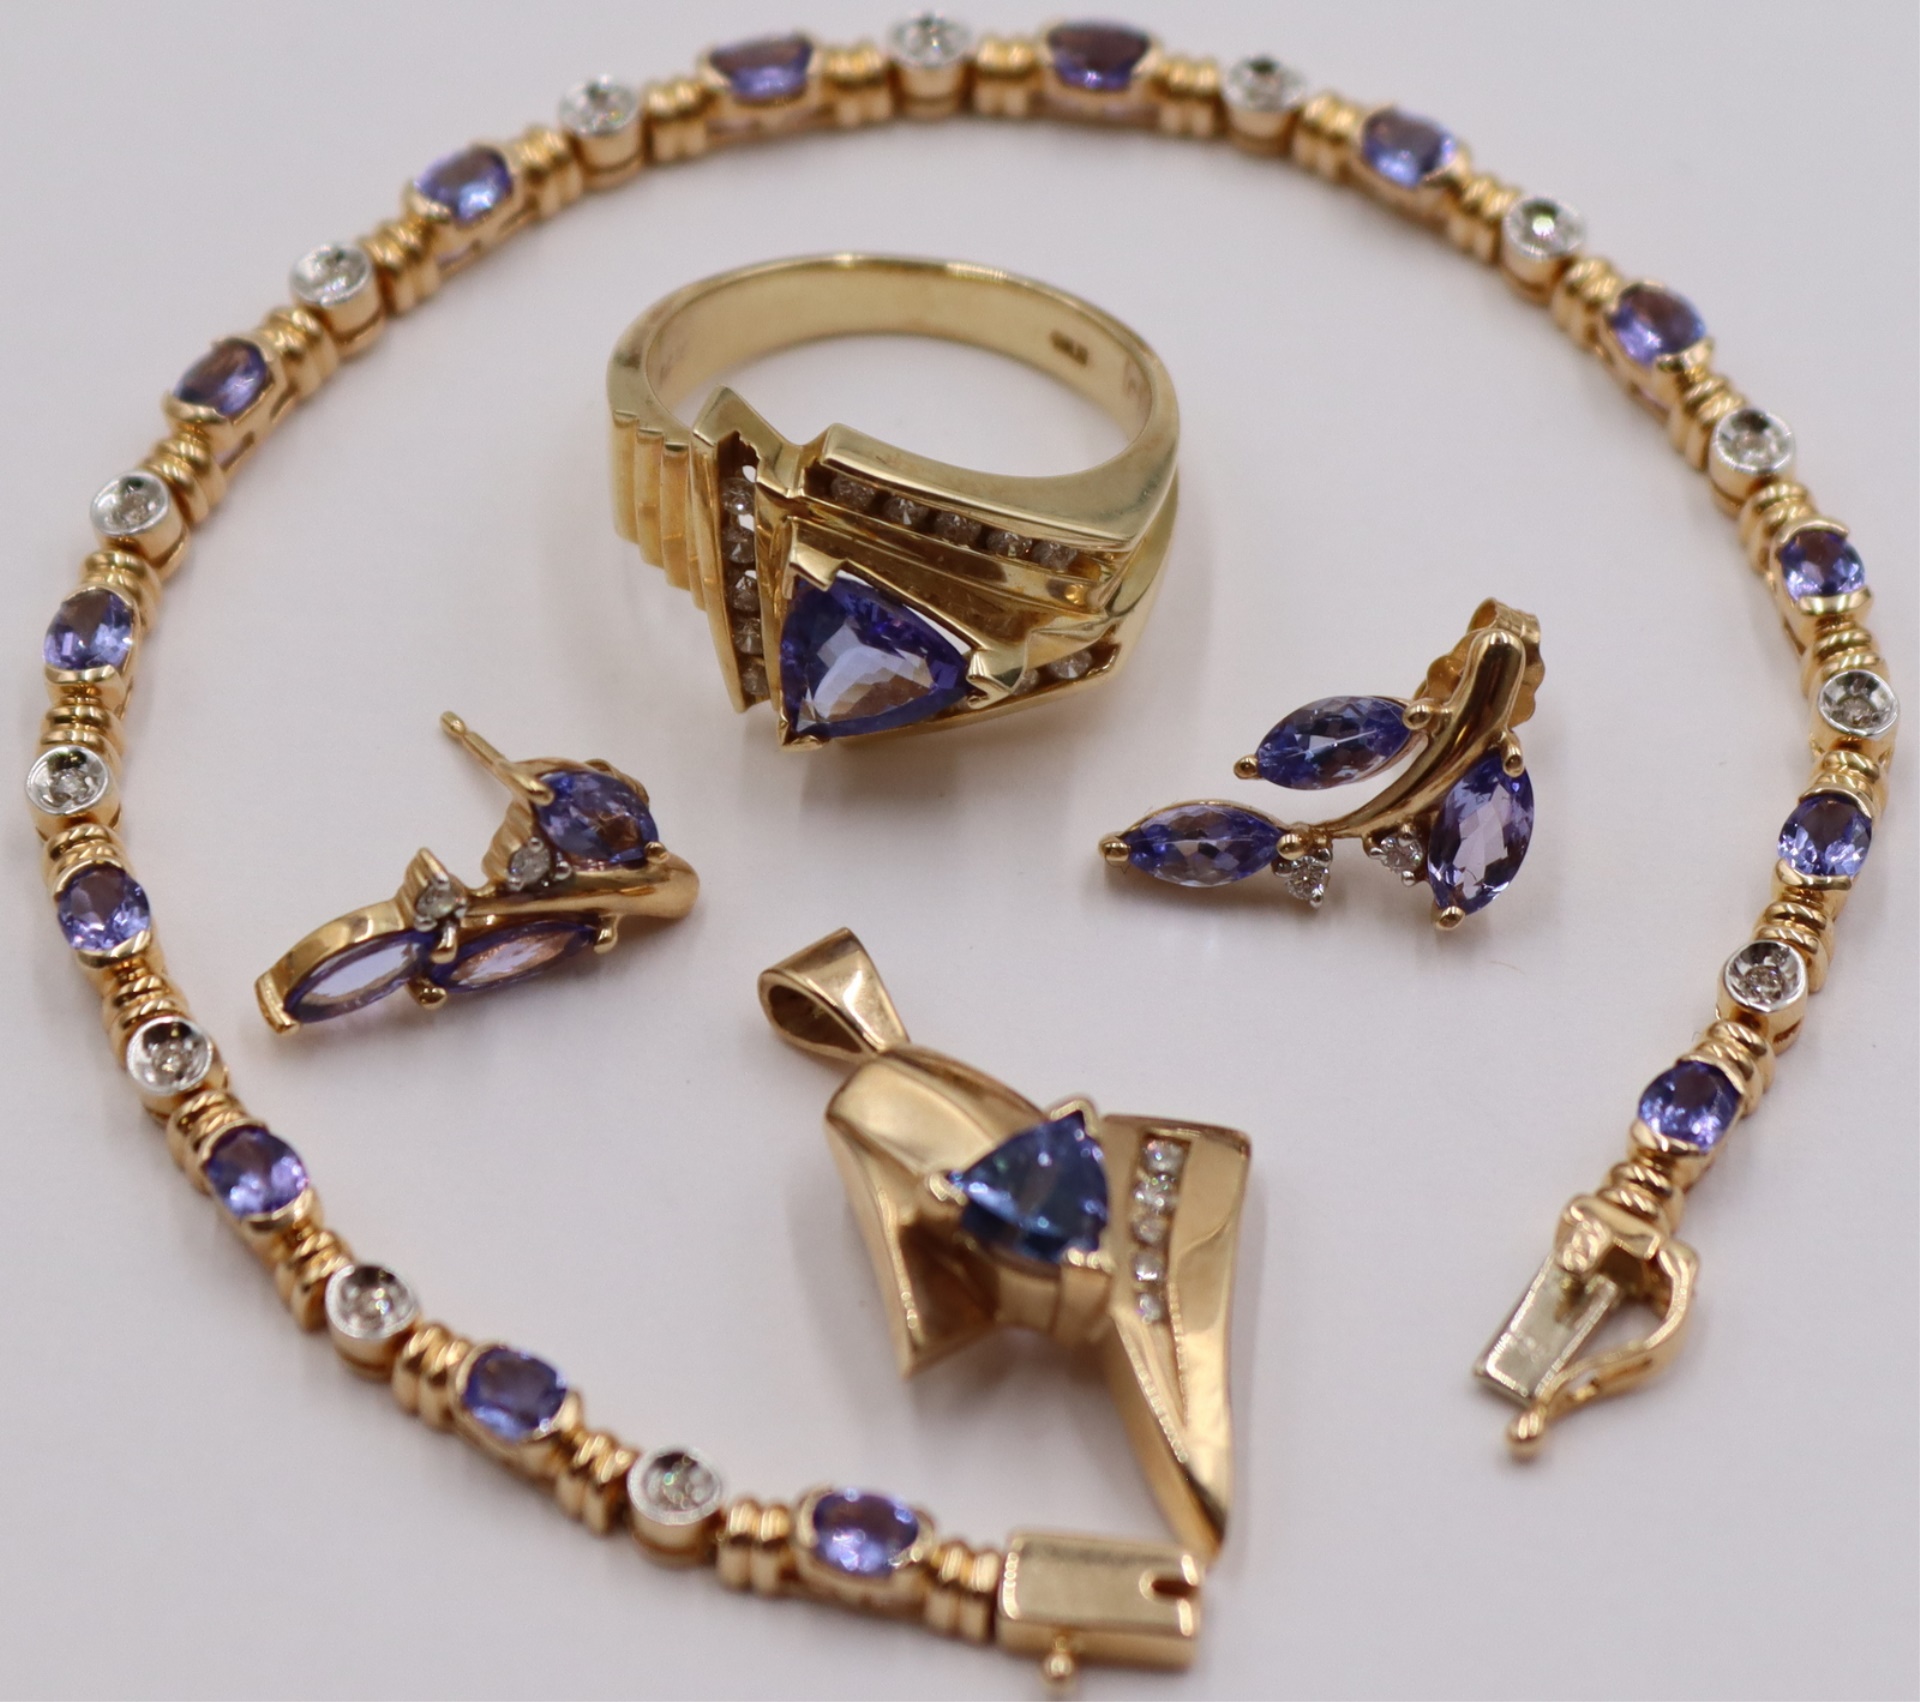 JEWELRY 14KT GOLD AND TANZANITE 3bd50a